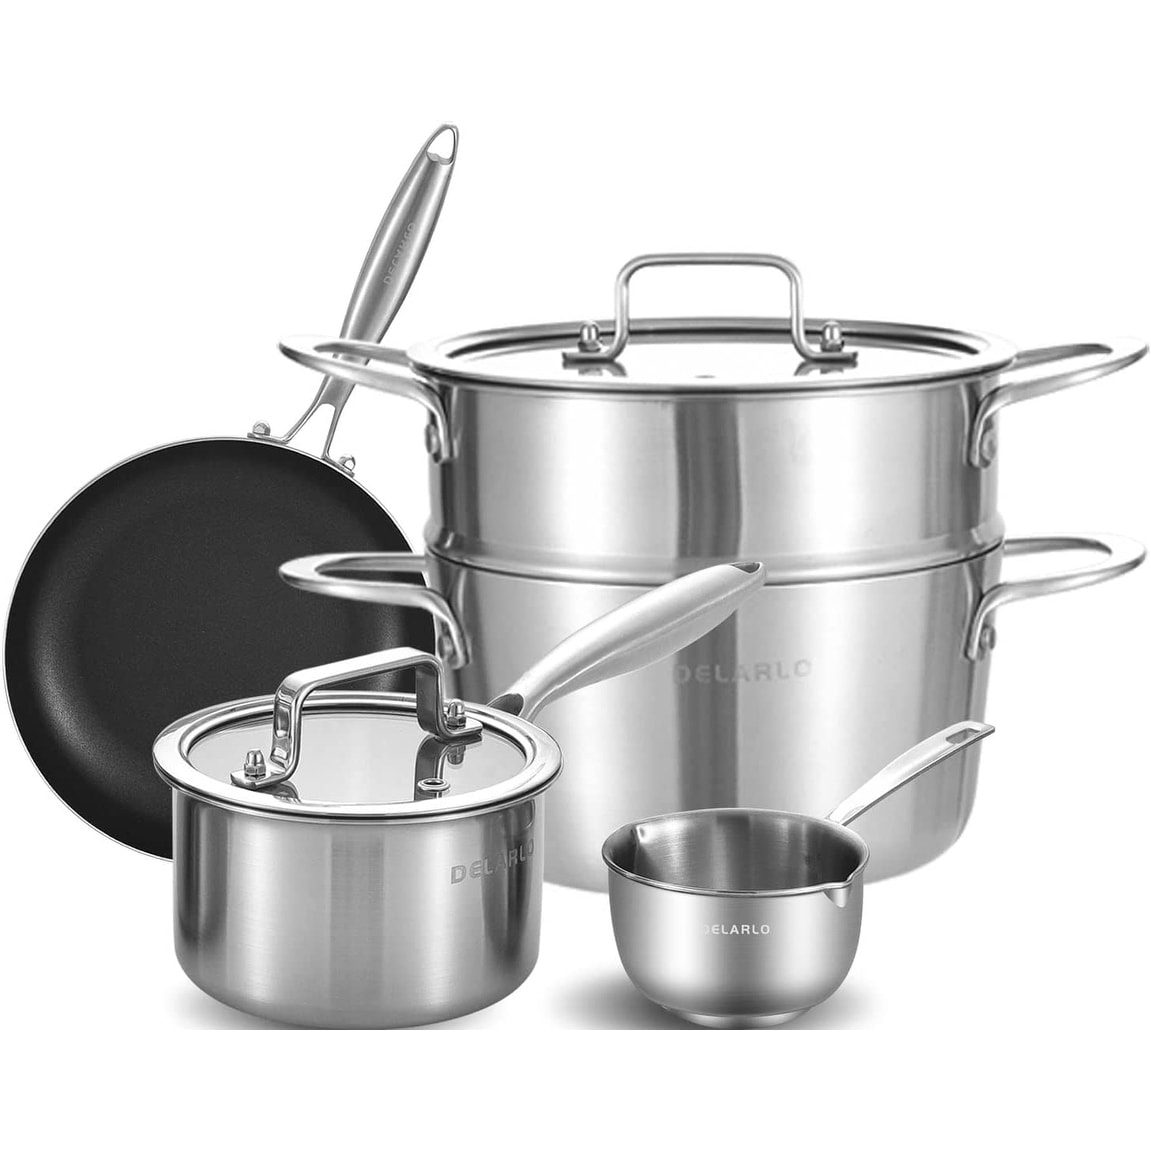 Delarlo Cookware Set of 14, Whole body Tri-Ply Stainless Steel Cookware  Set, Heats quickly Cookware, Suitable for All Stove Kitchen, Pots and Pans